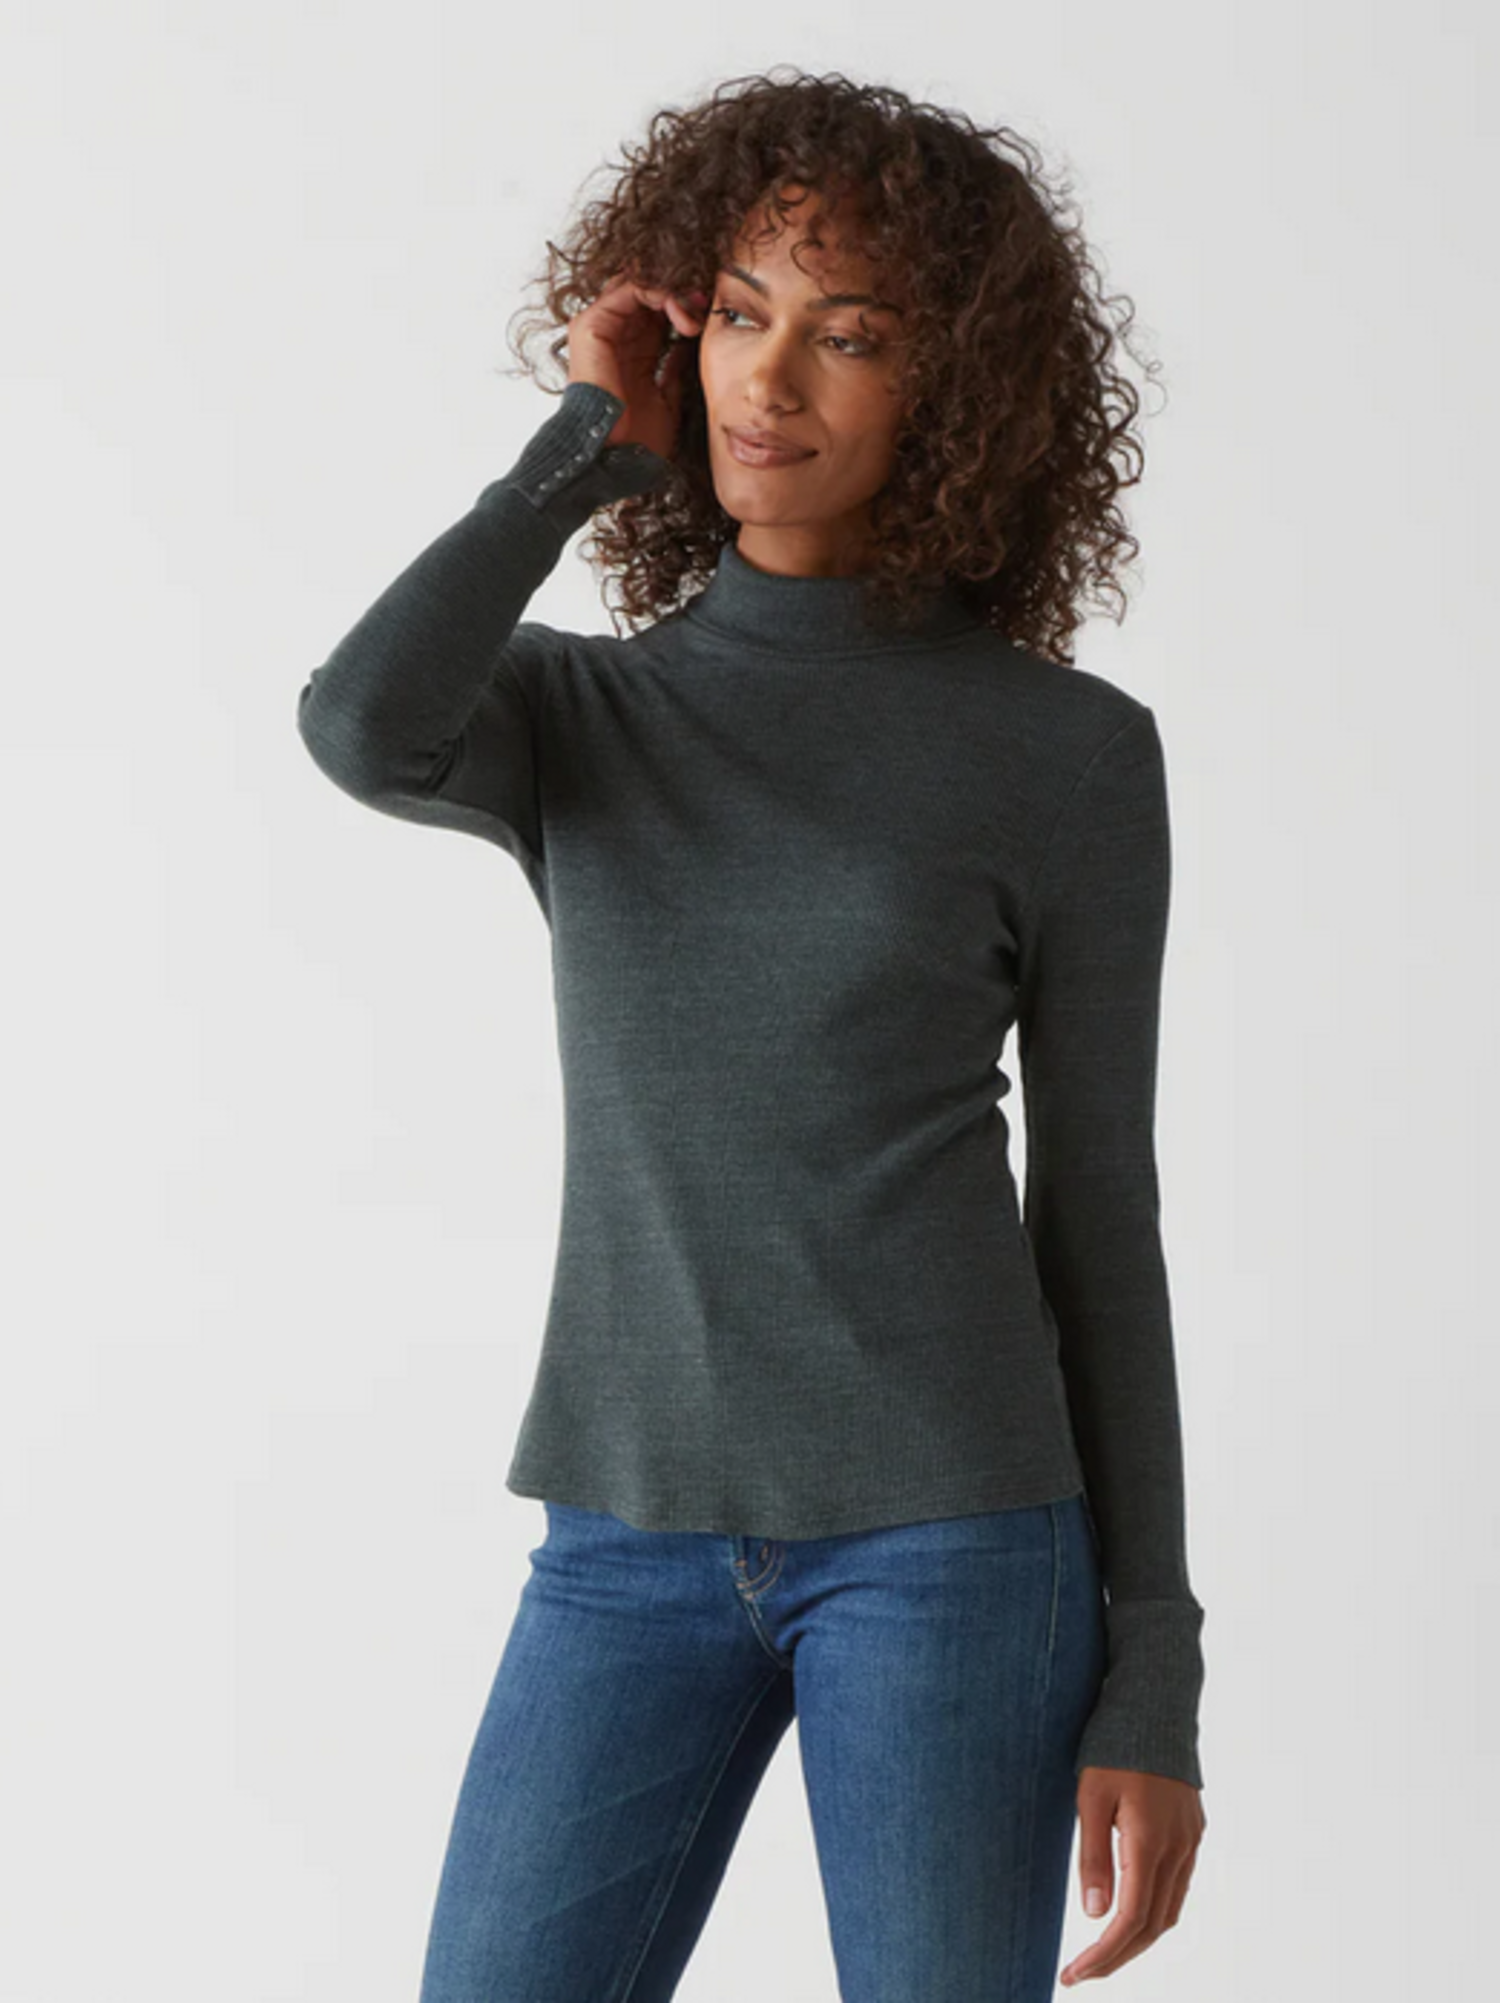 Mara Thermal Turtleneck Dark Ivy - Rags and Riches Lifestyle Boutique